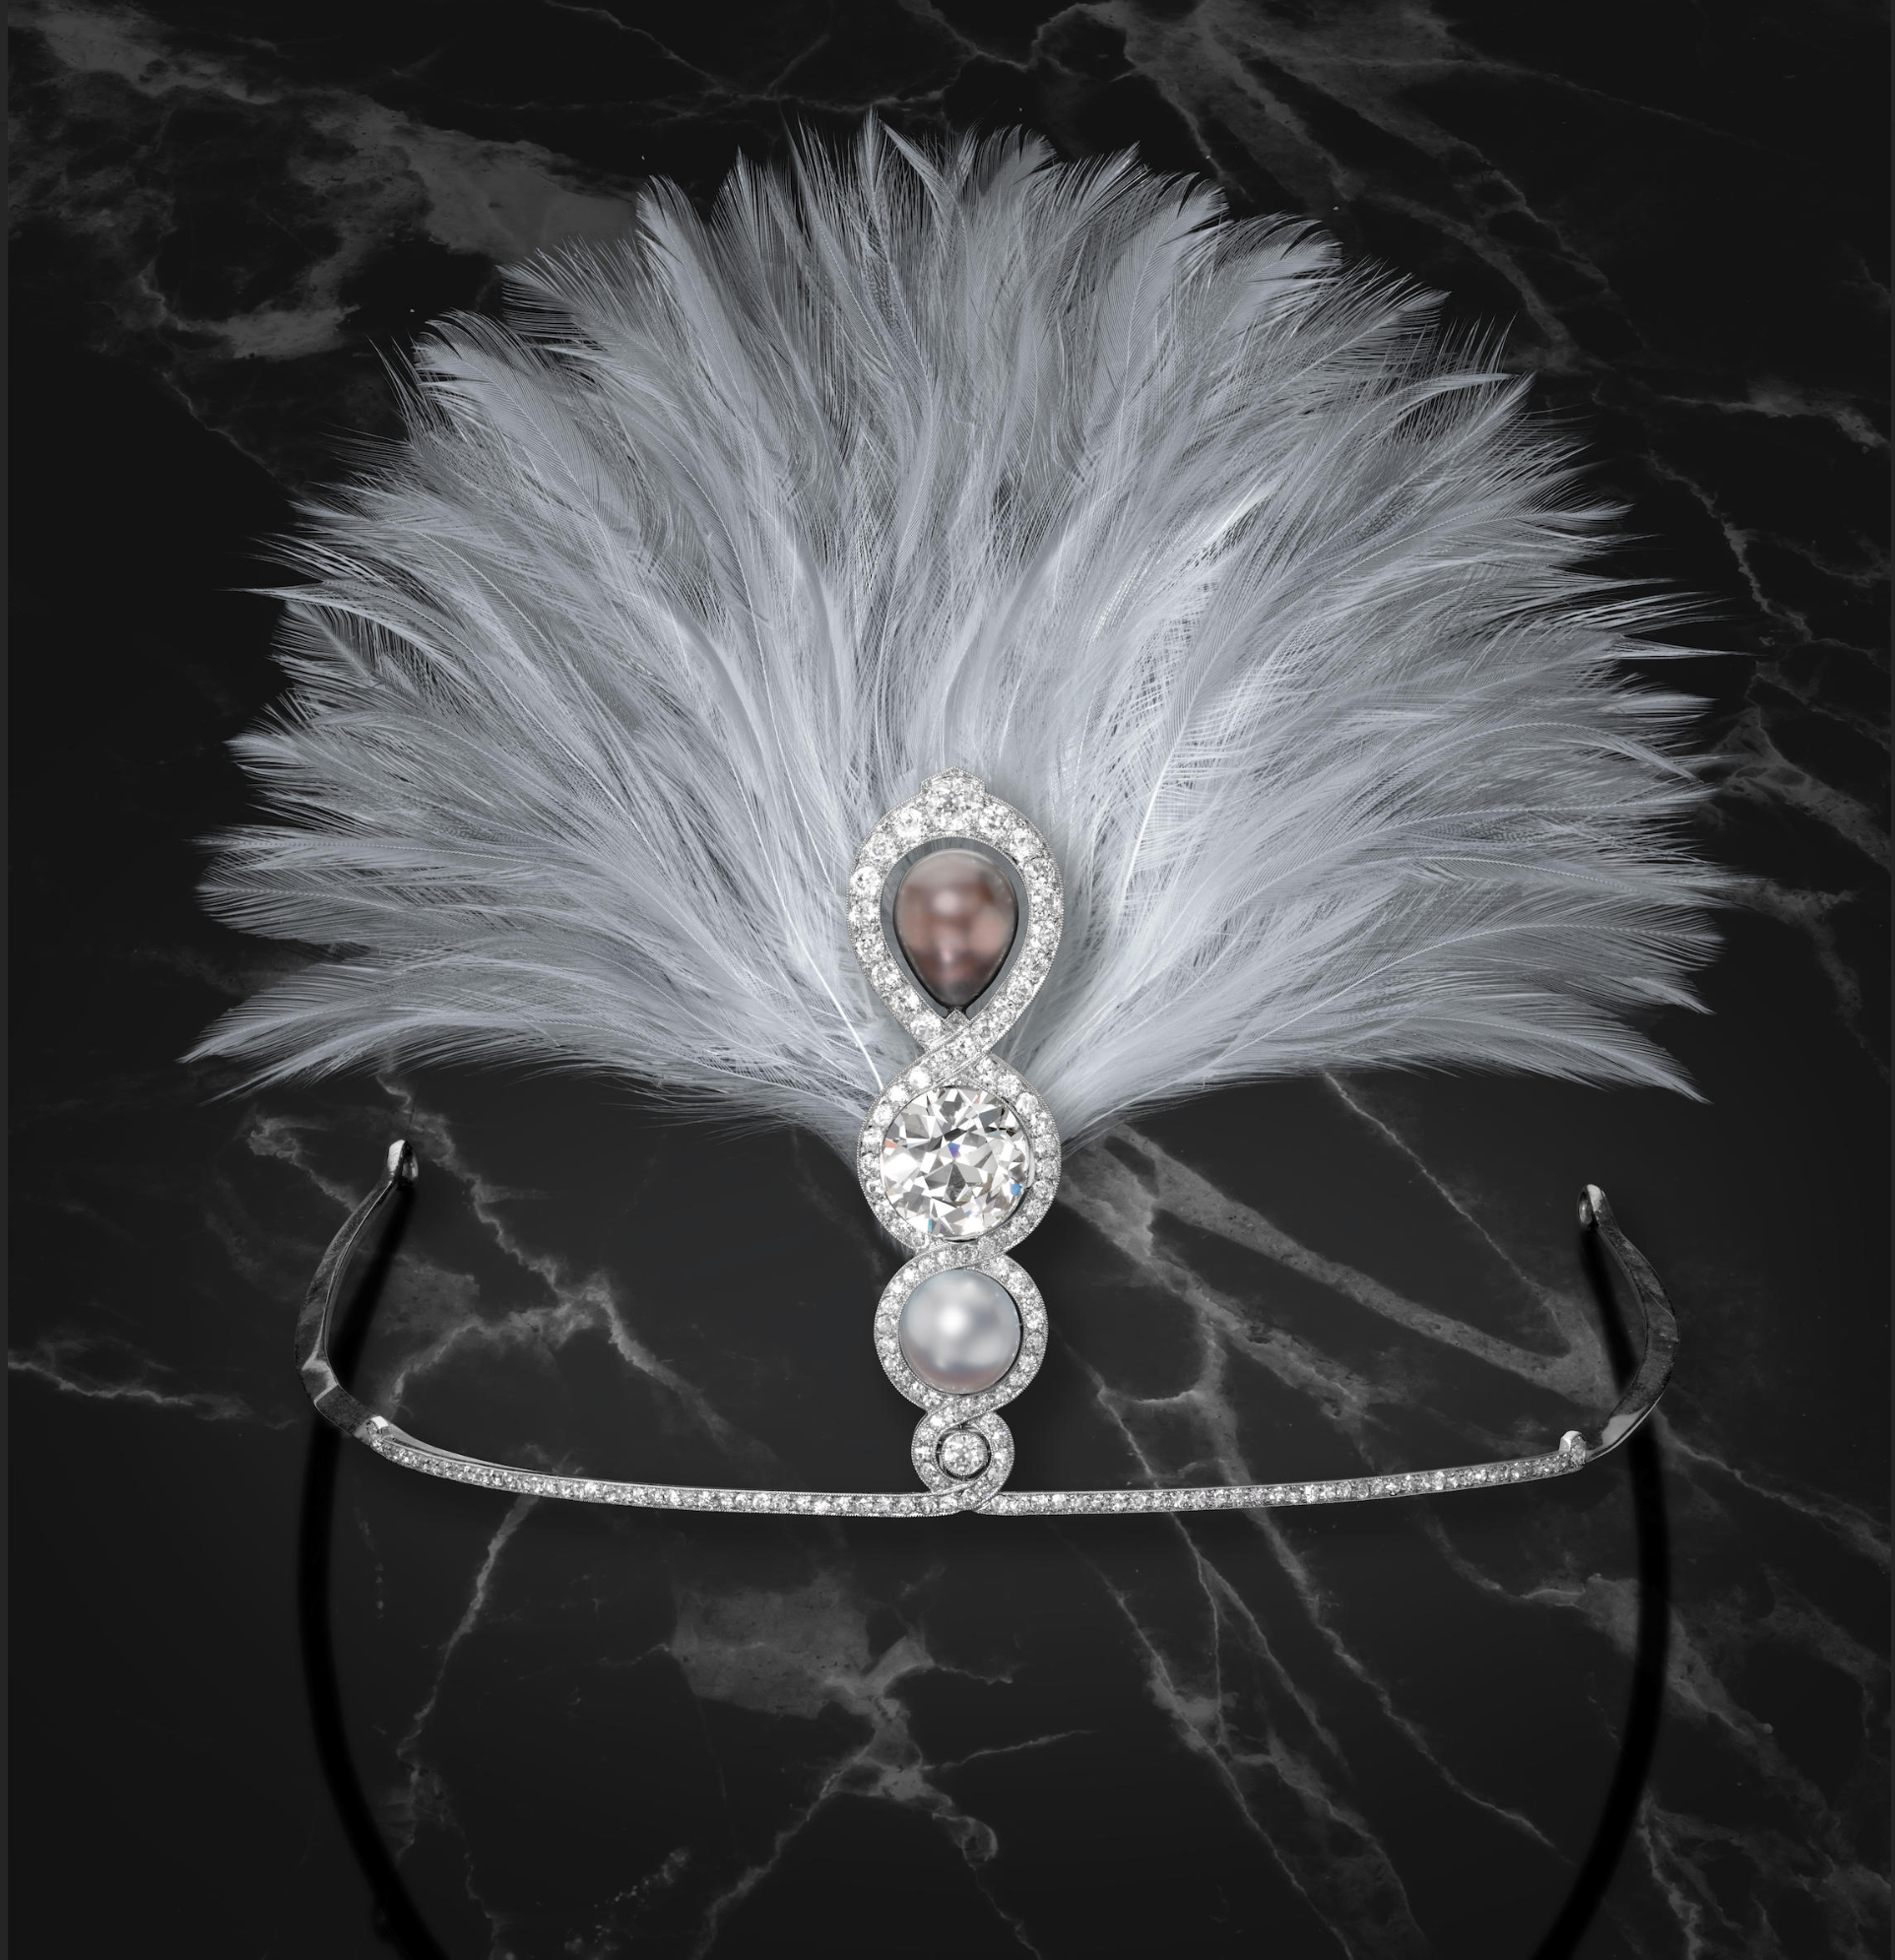 The large diamond is an 8.25ct European cut. The aigrette was made for sugar heiress Héléne Irwin Crocker Fagan. Diamond and natural pearl aigrette by Cartier, 1914. Sold by Bonhams, May 2022 for $586,275. 